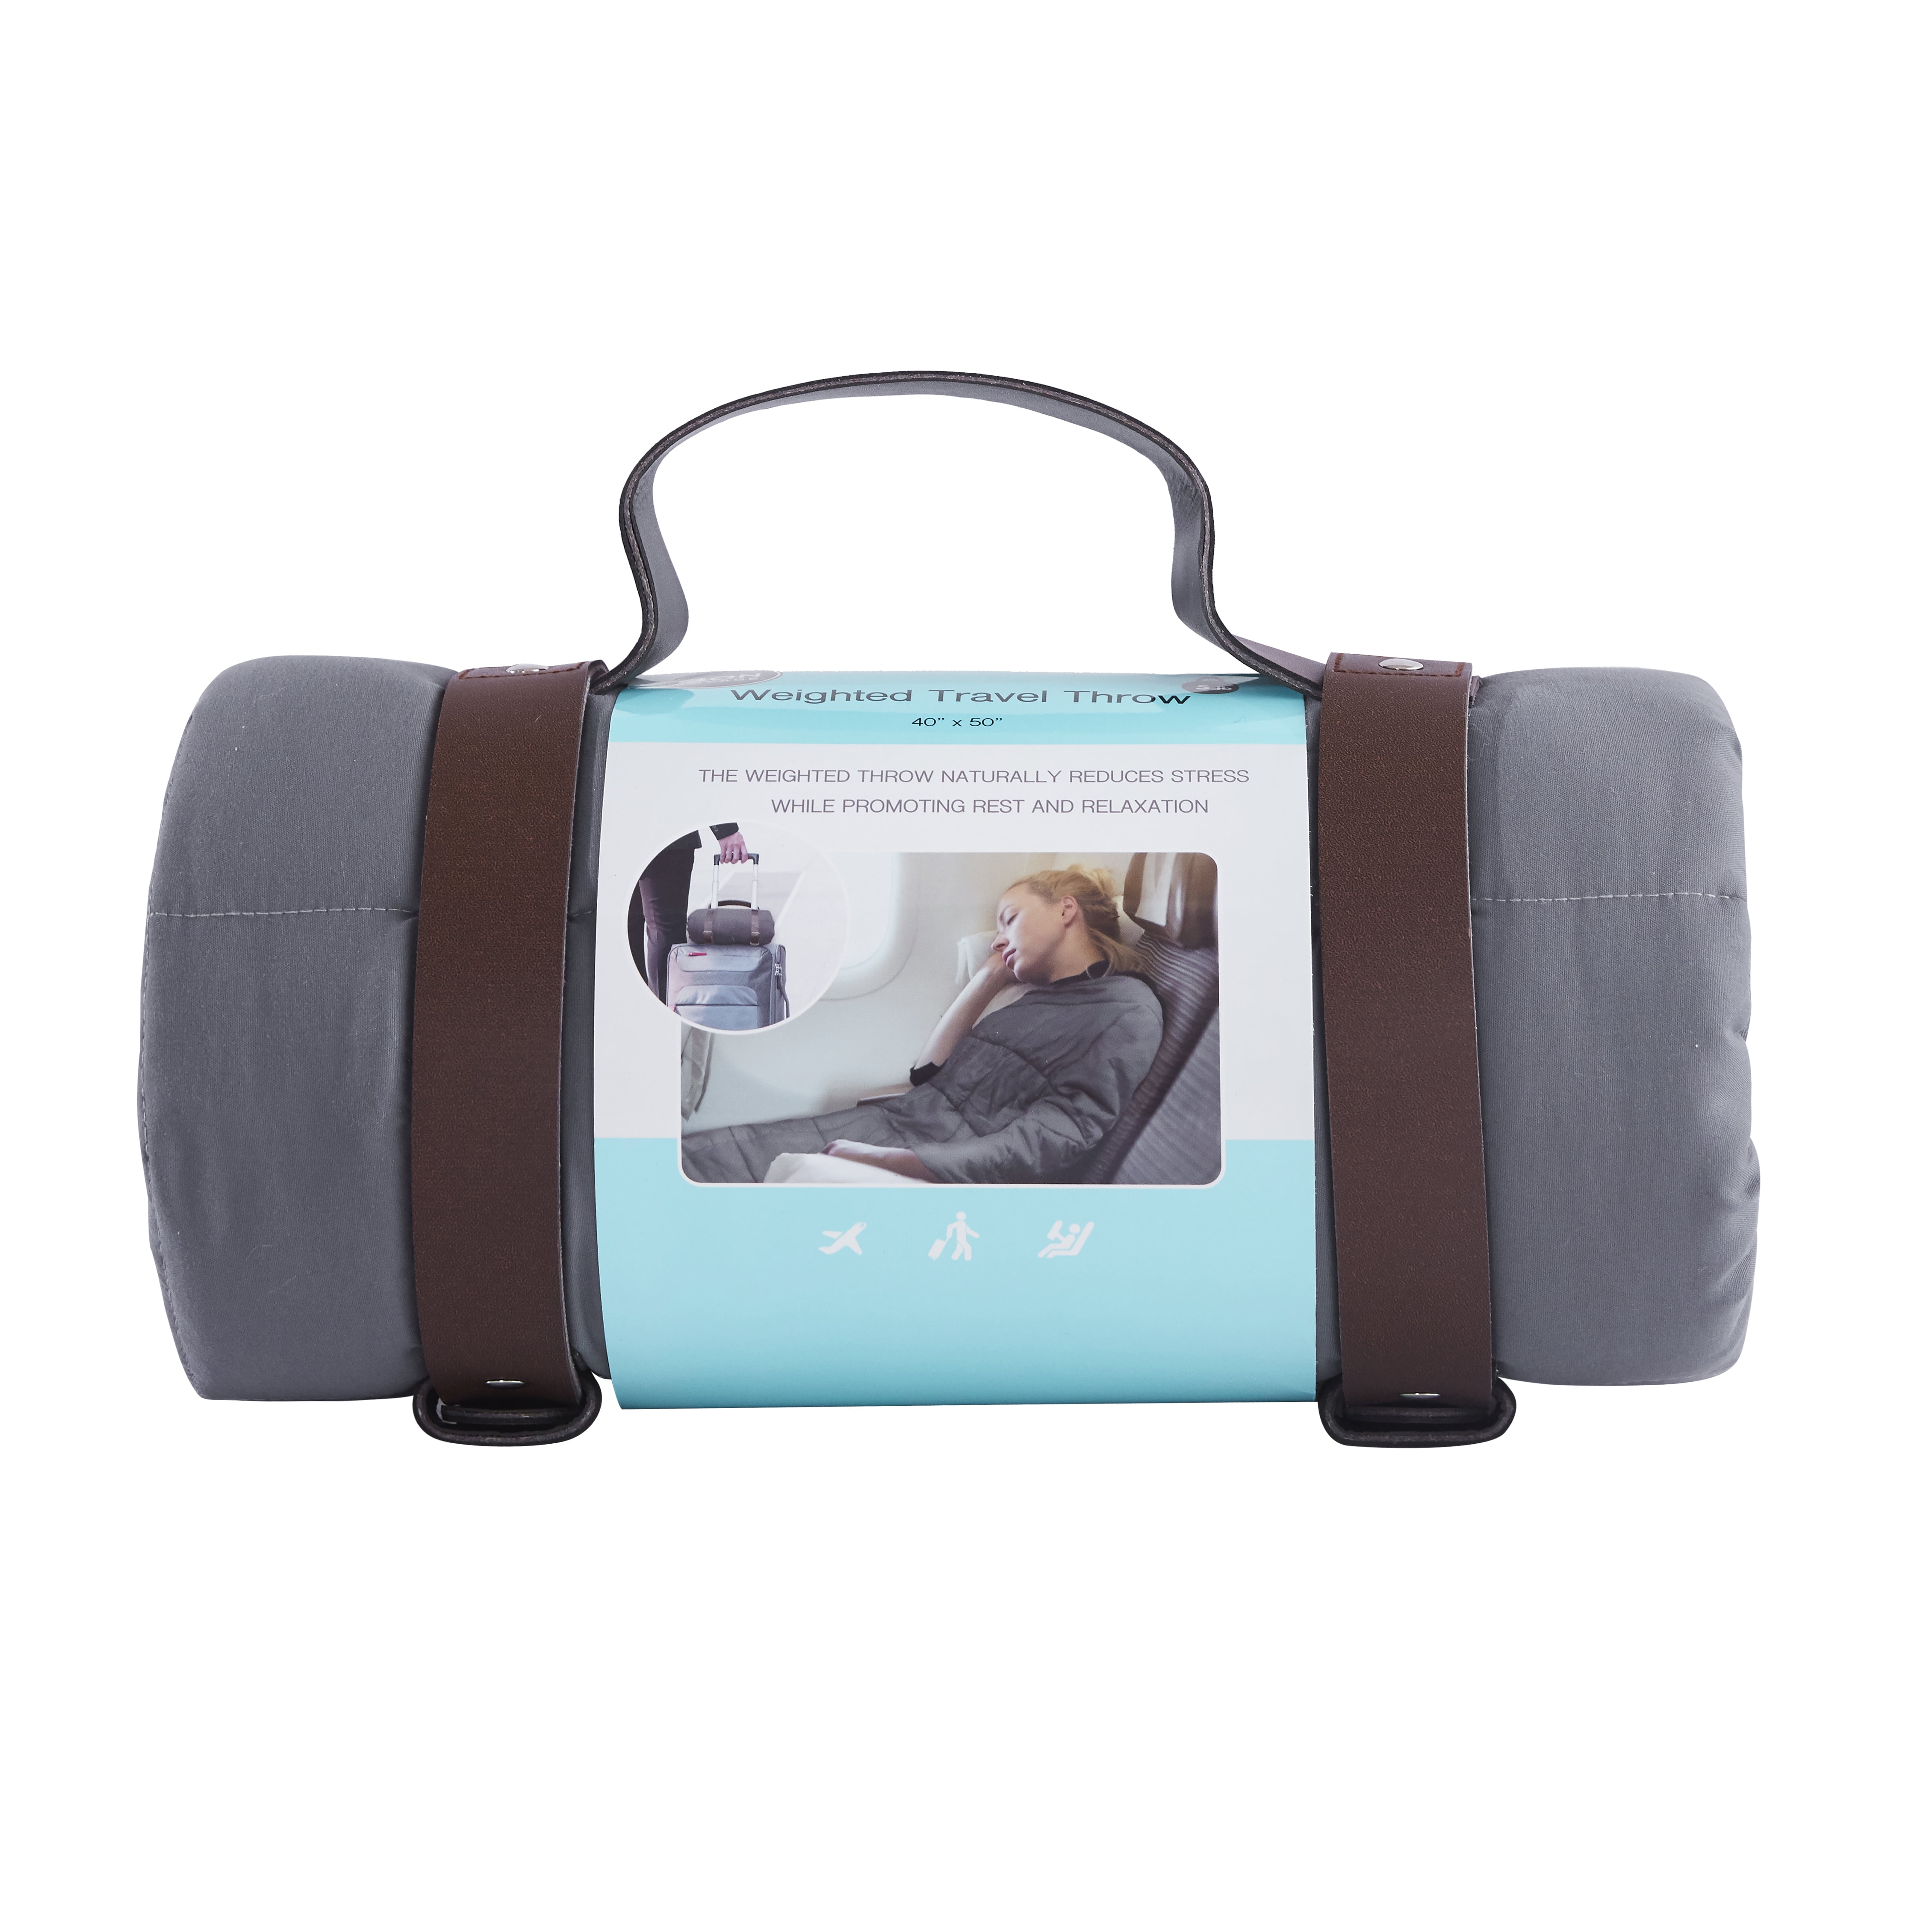 Bon Voyage Gray 5 lbs Travel Weighted Throw 40